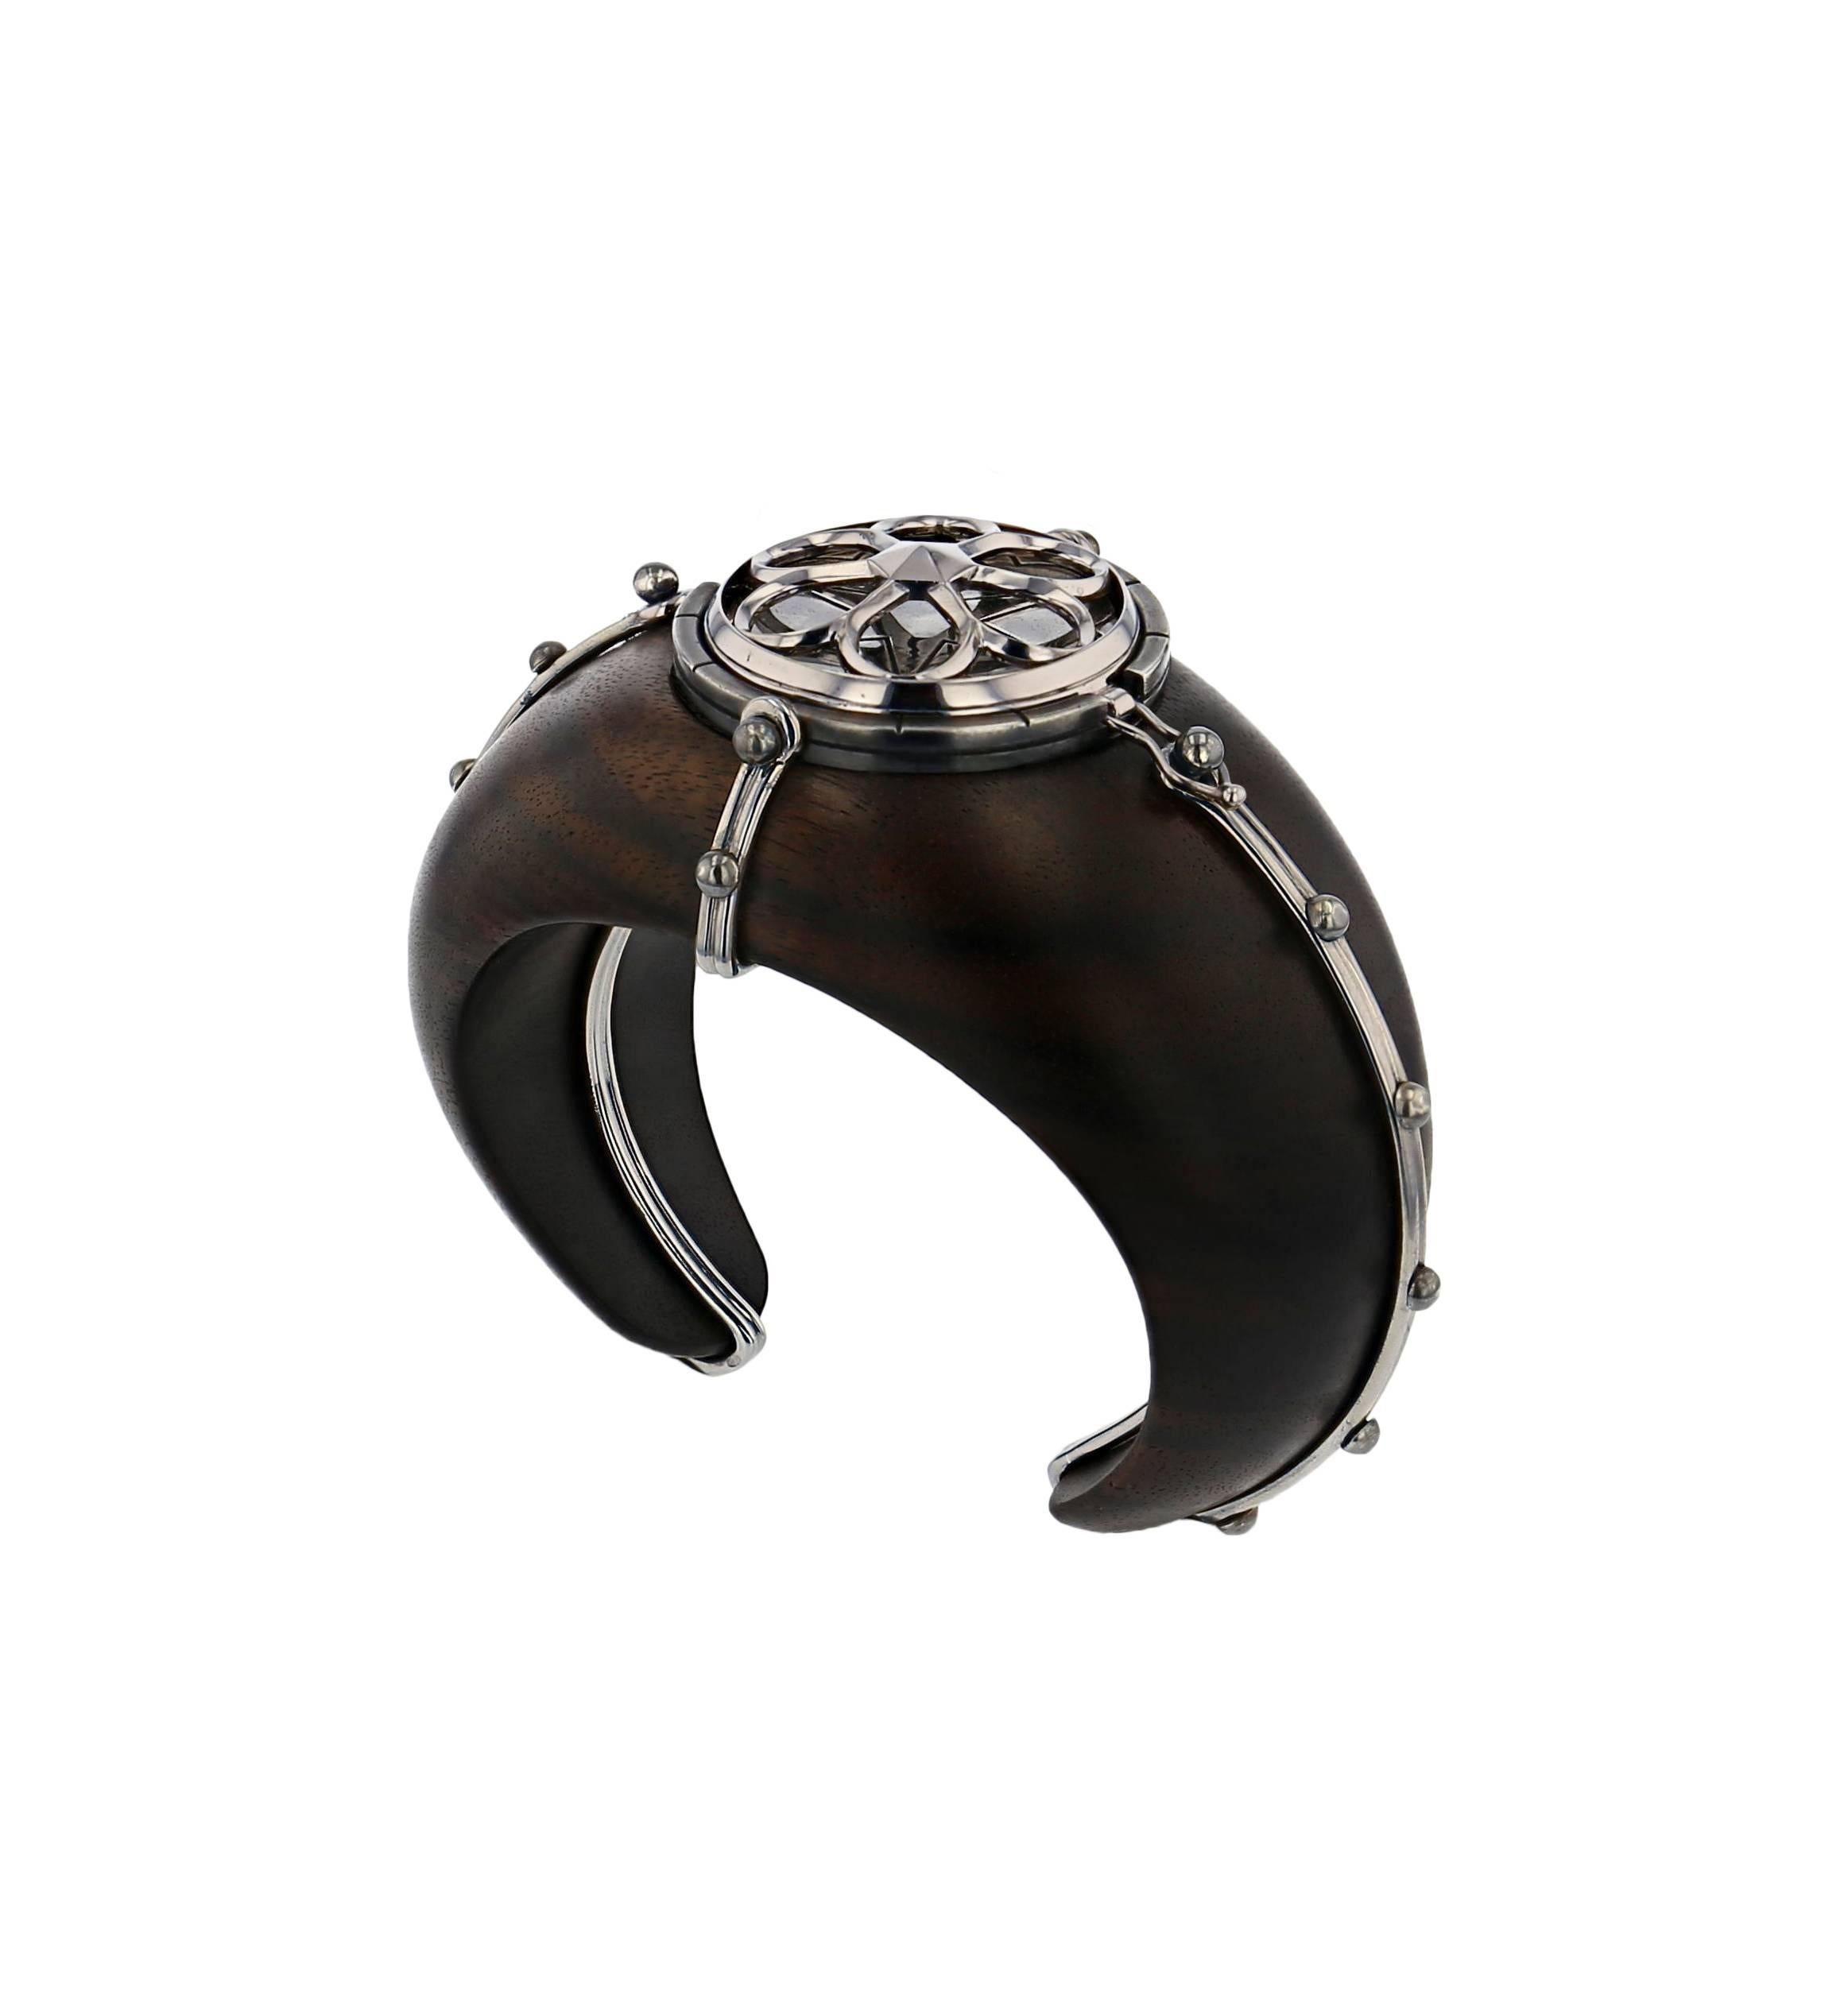 Desdemone Cuff Ebony 18 Carat White Gold Rubelite Lapis Diamonds

This large cuff is sculpted from Macassar ebony within a gold cage. At the centre, a pivoting sphere shows a white gold rosette on patinated silver when closed, and opens up to reveal